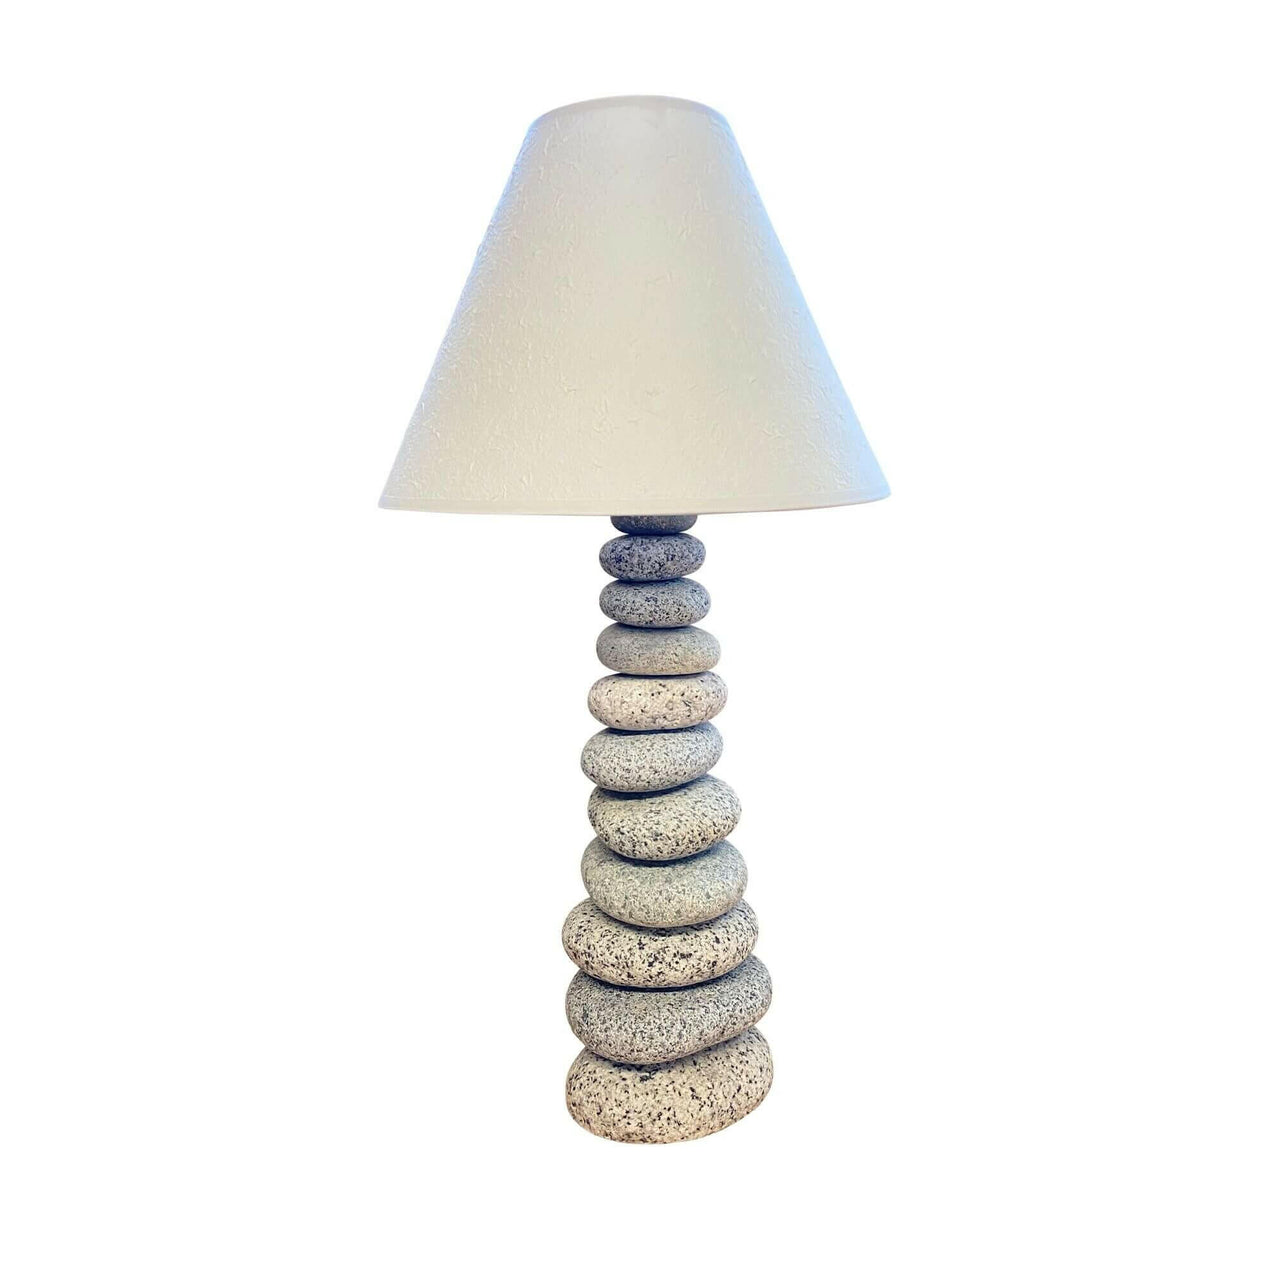 Stacked Stone Lamp, Handcrafted from Beach & River Rocks Lamps New England Trading Co 24" - 25" with shade  